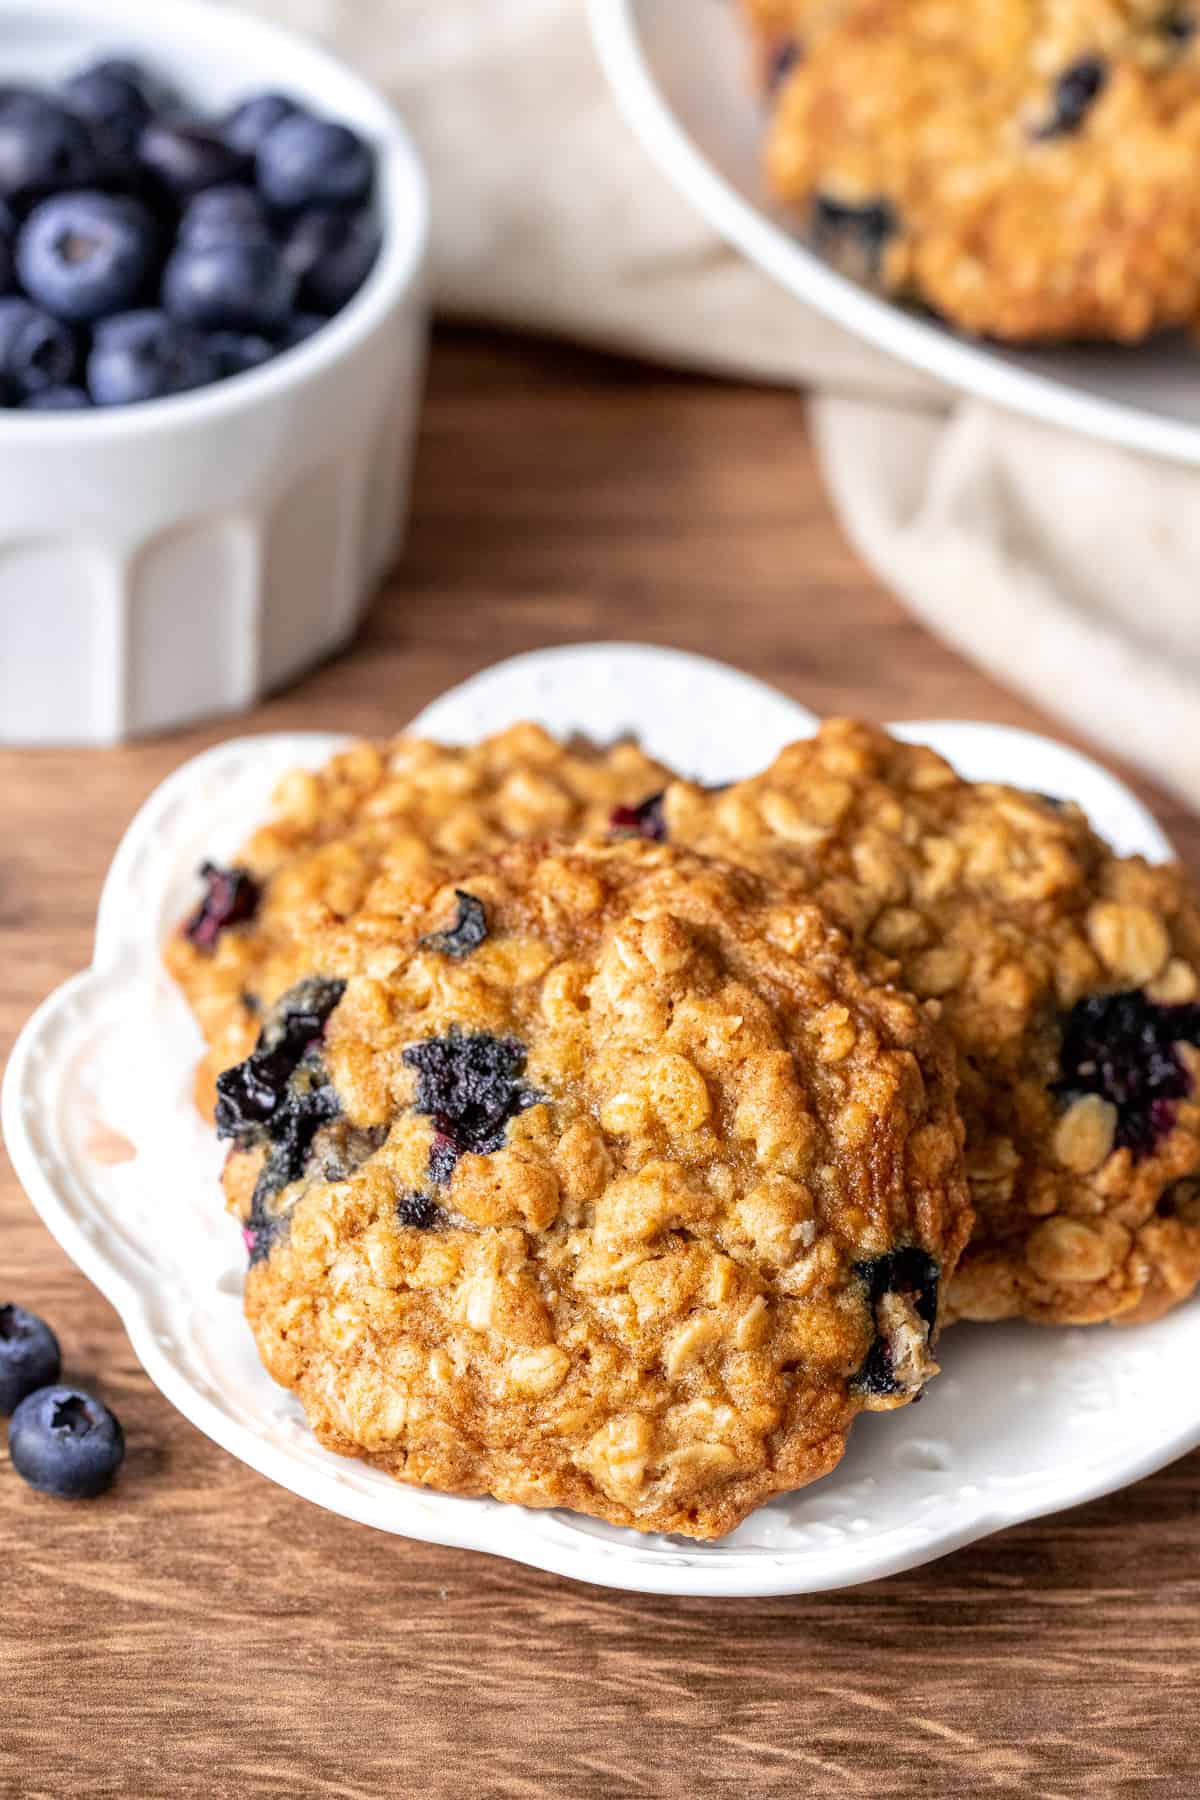 Plate of 4 blueberry oatmeal cookies